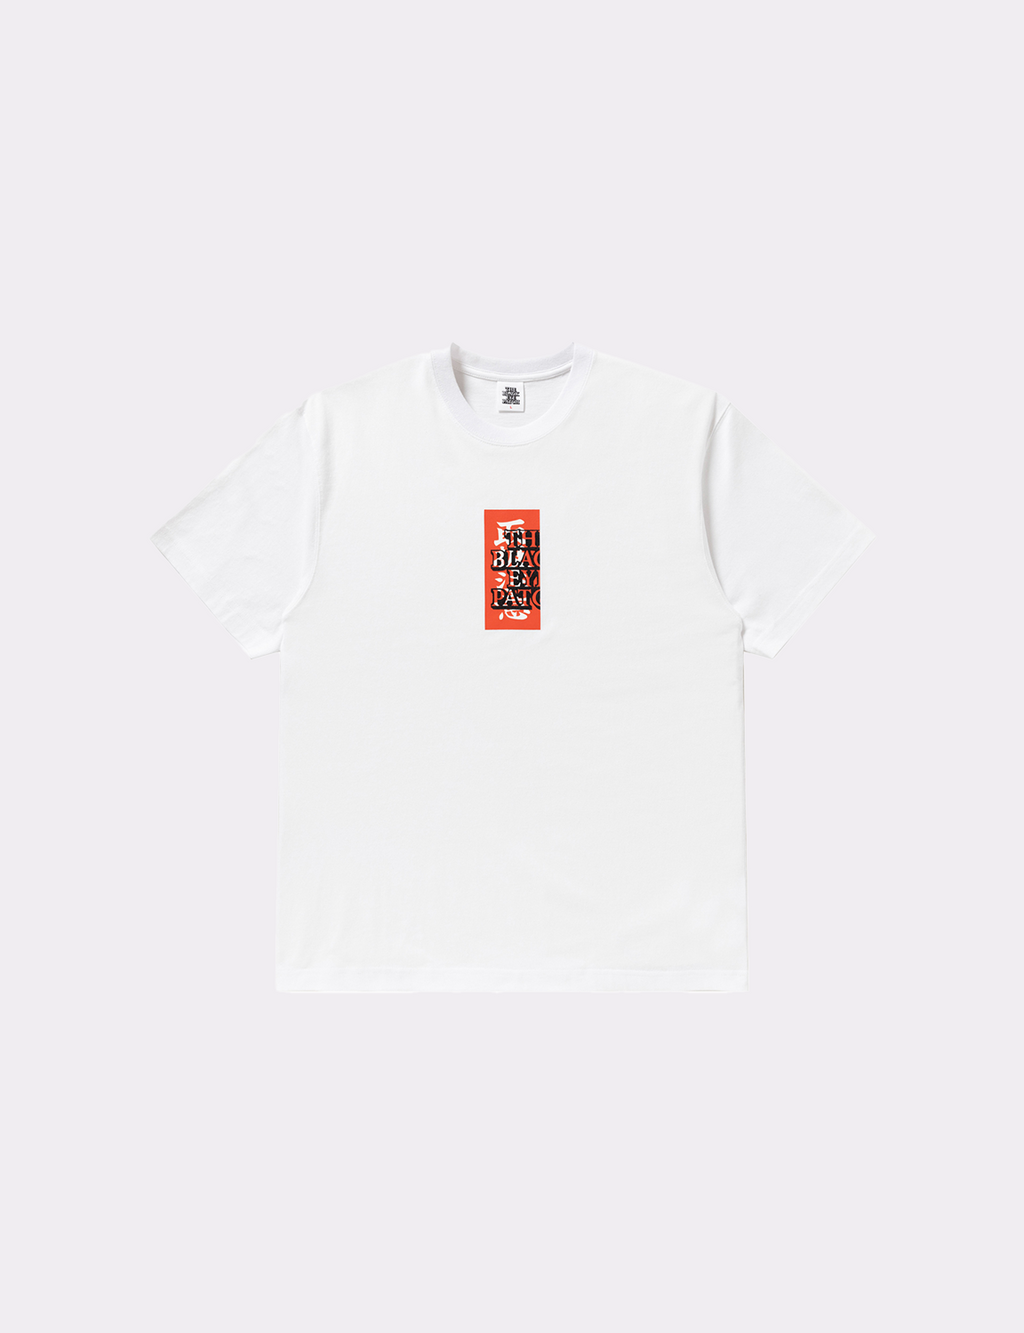 BlackEyePatch - HANDLE WITH CARE TEE – The Contemporary Fix Kyoto